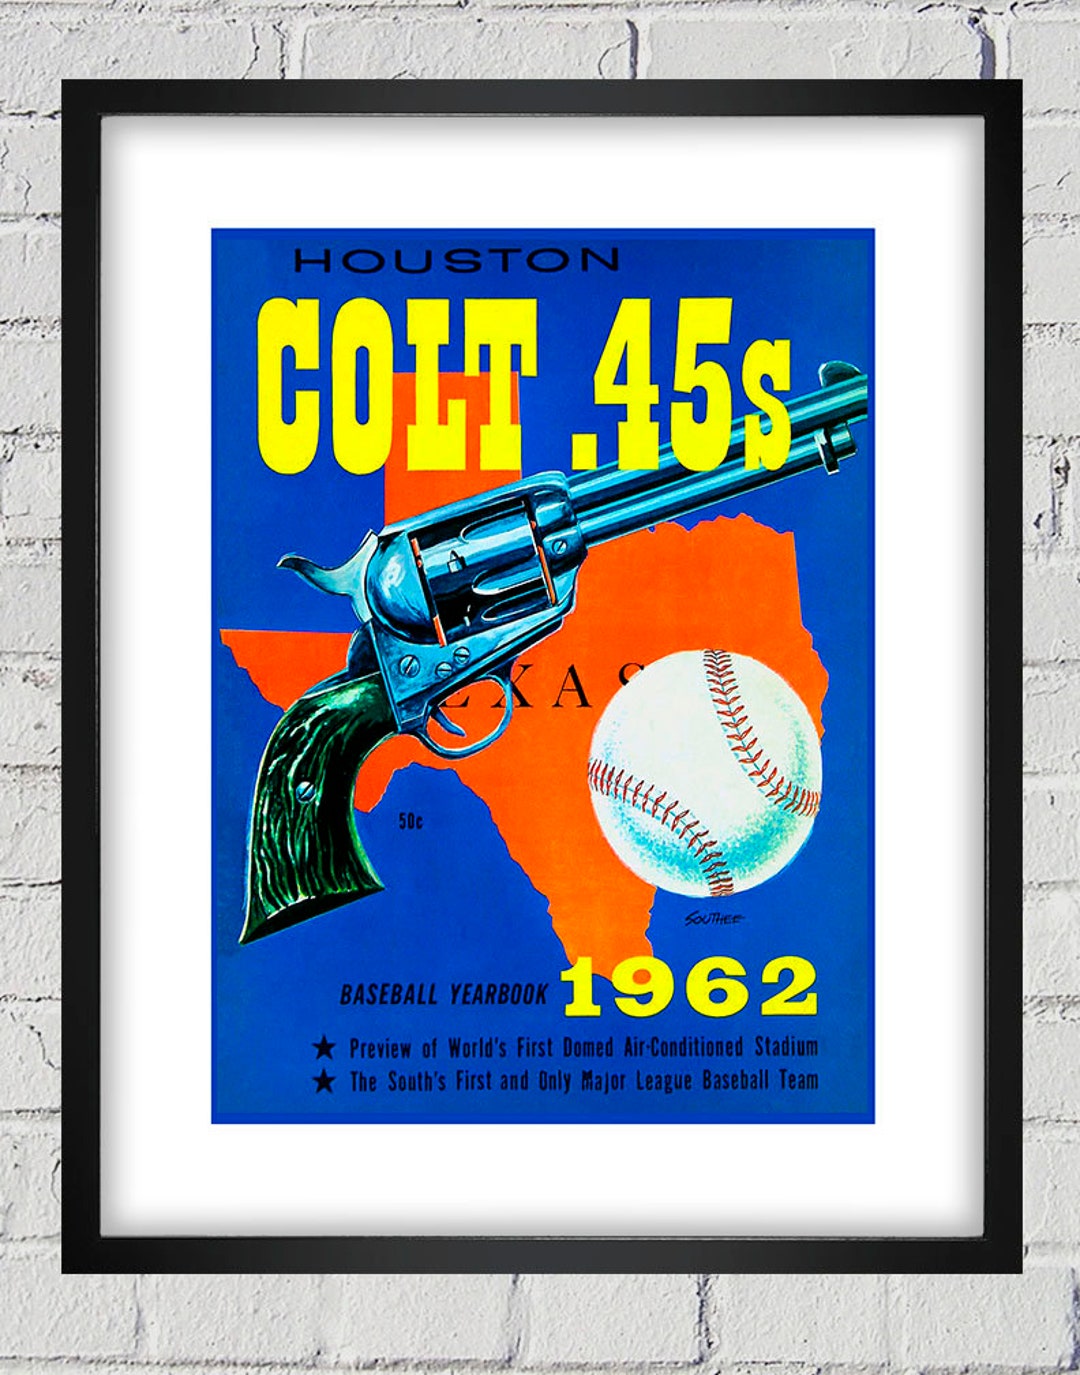 A Treasure Trove of Awesome Colt .45s Photos